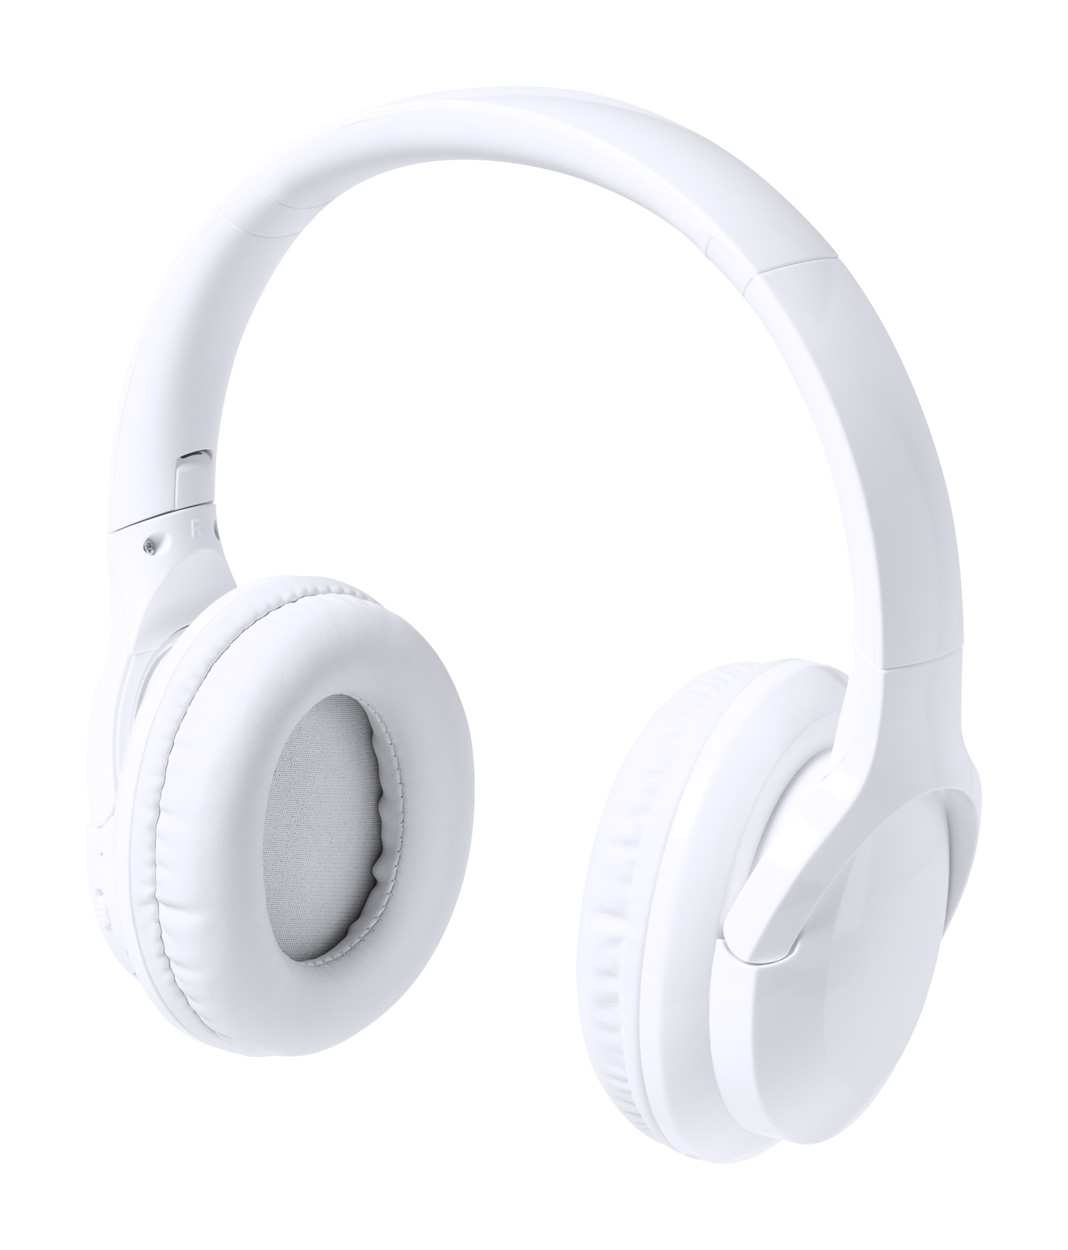 Plastic foldable noise-cancelling headphones WITUMS - white